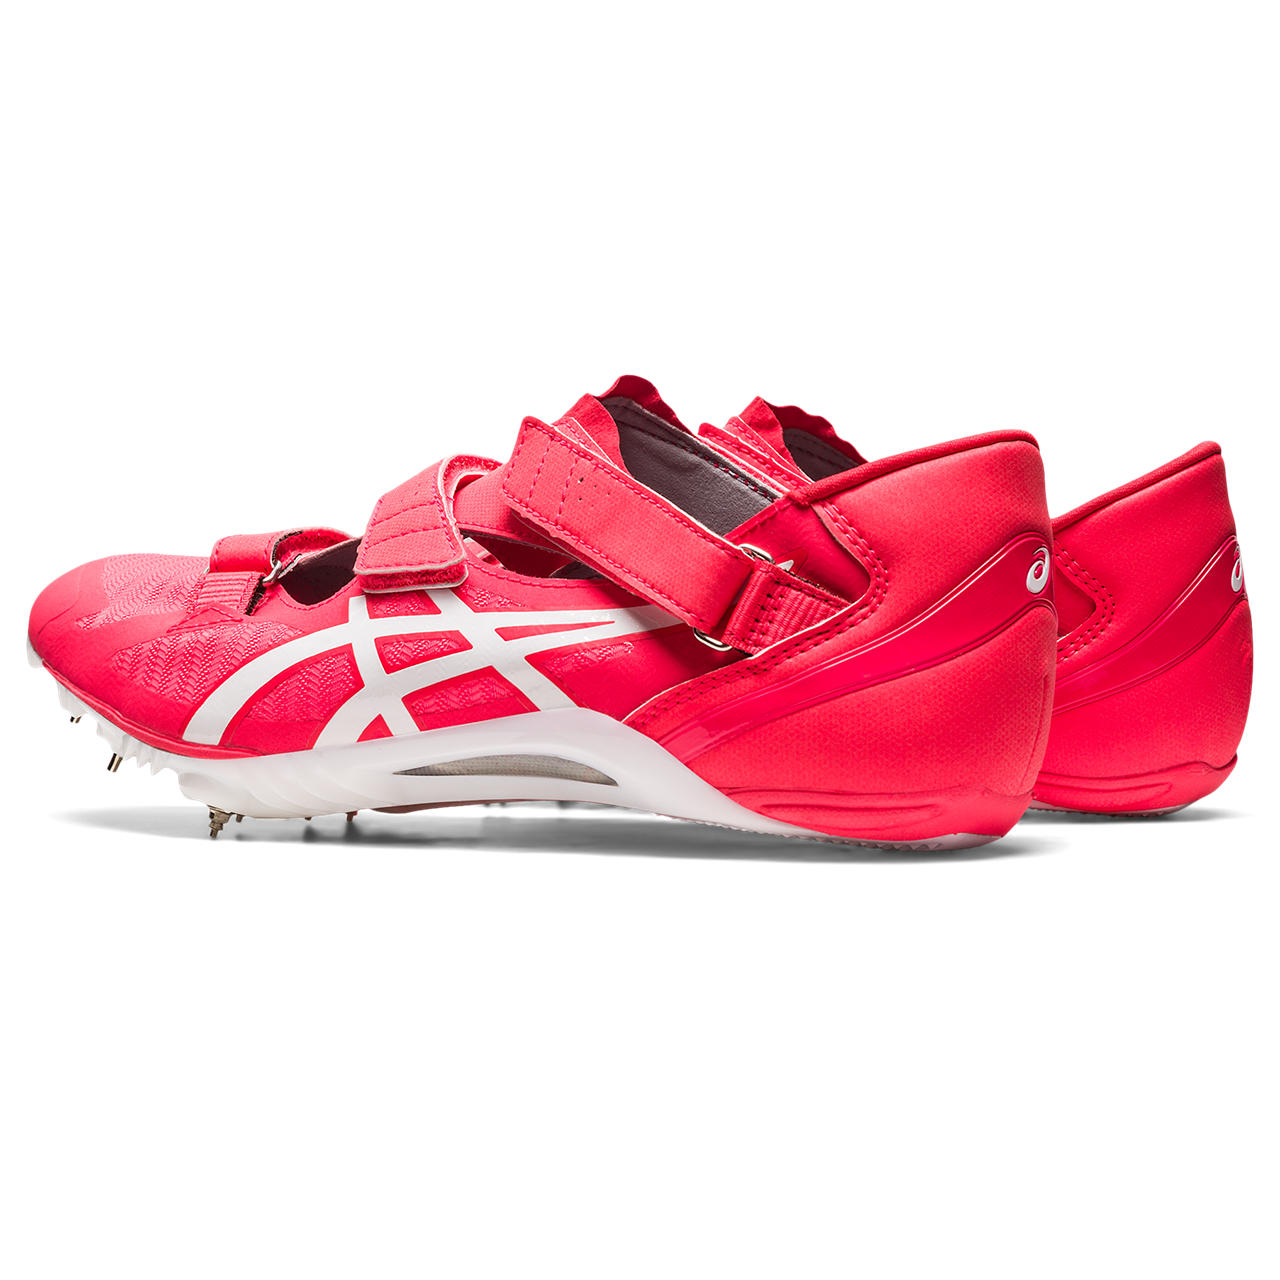 ASICS CYBERBLADE 16 image number null